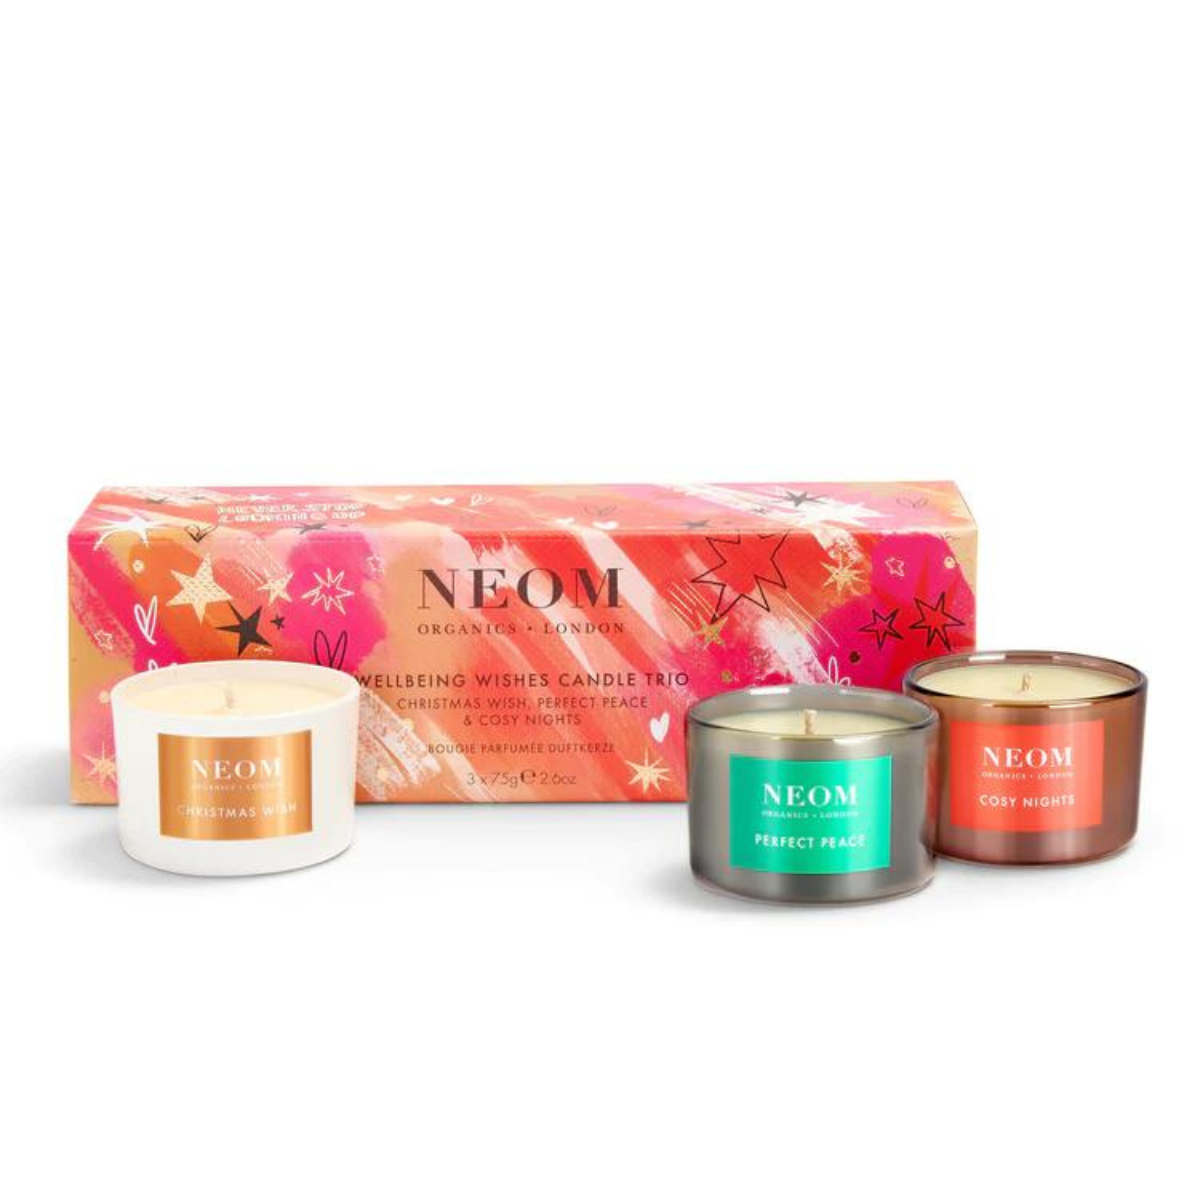 Neom Wellbeing Wishes Candle Trio.